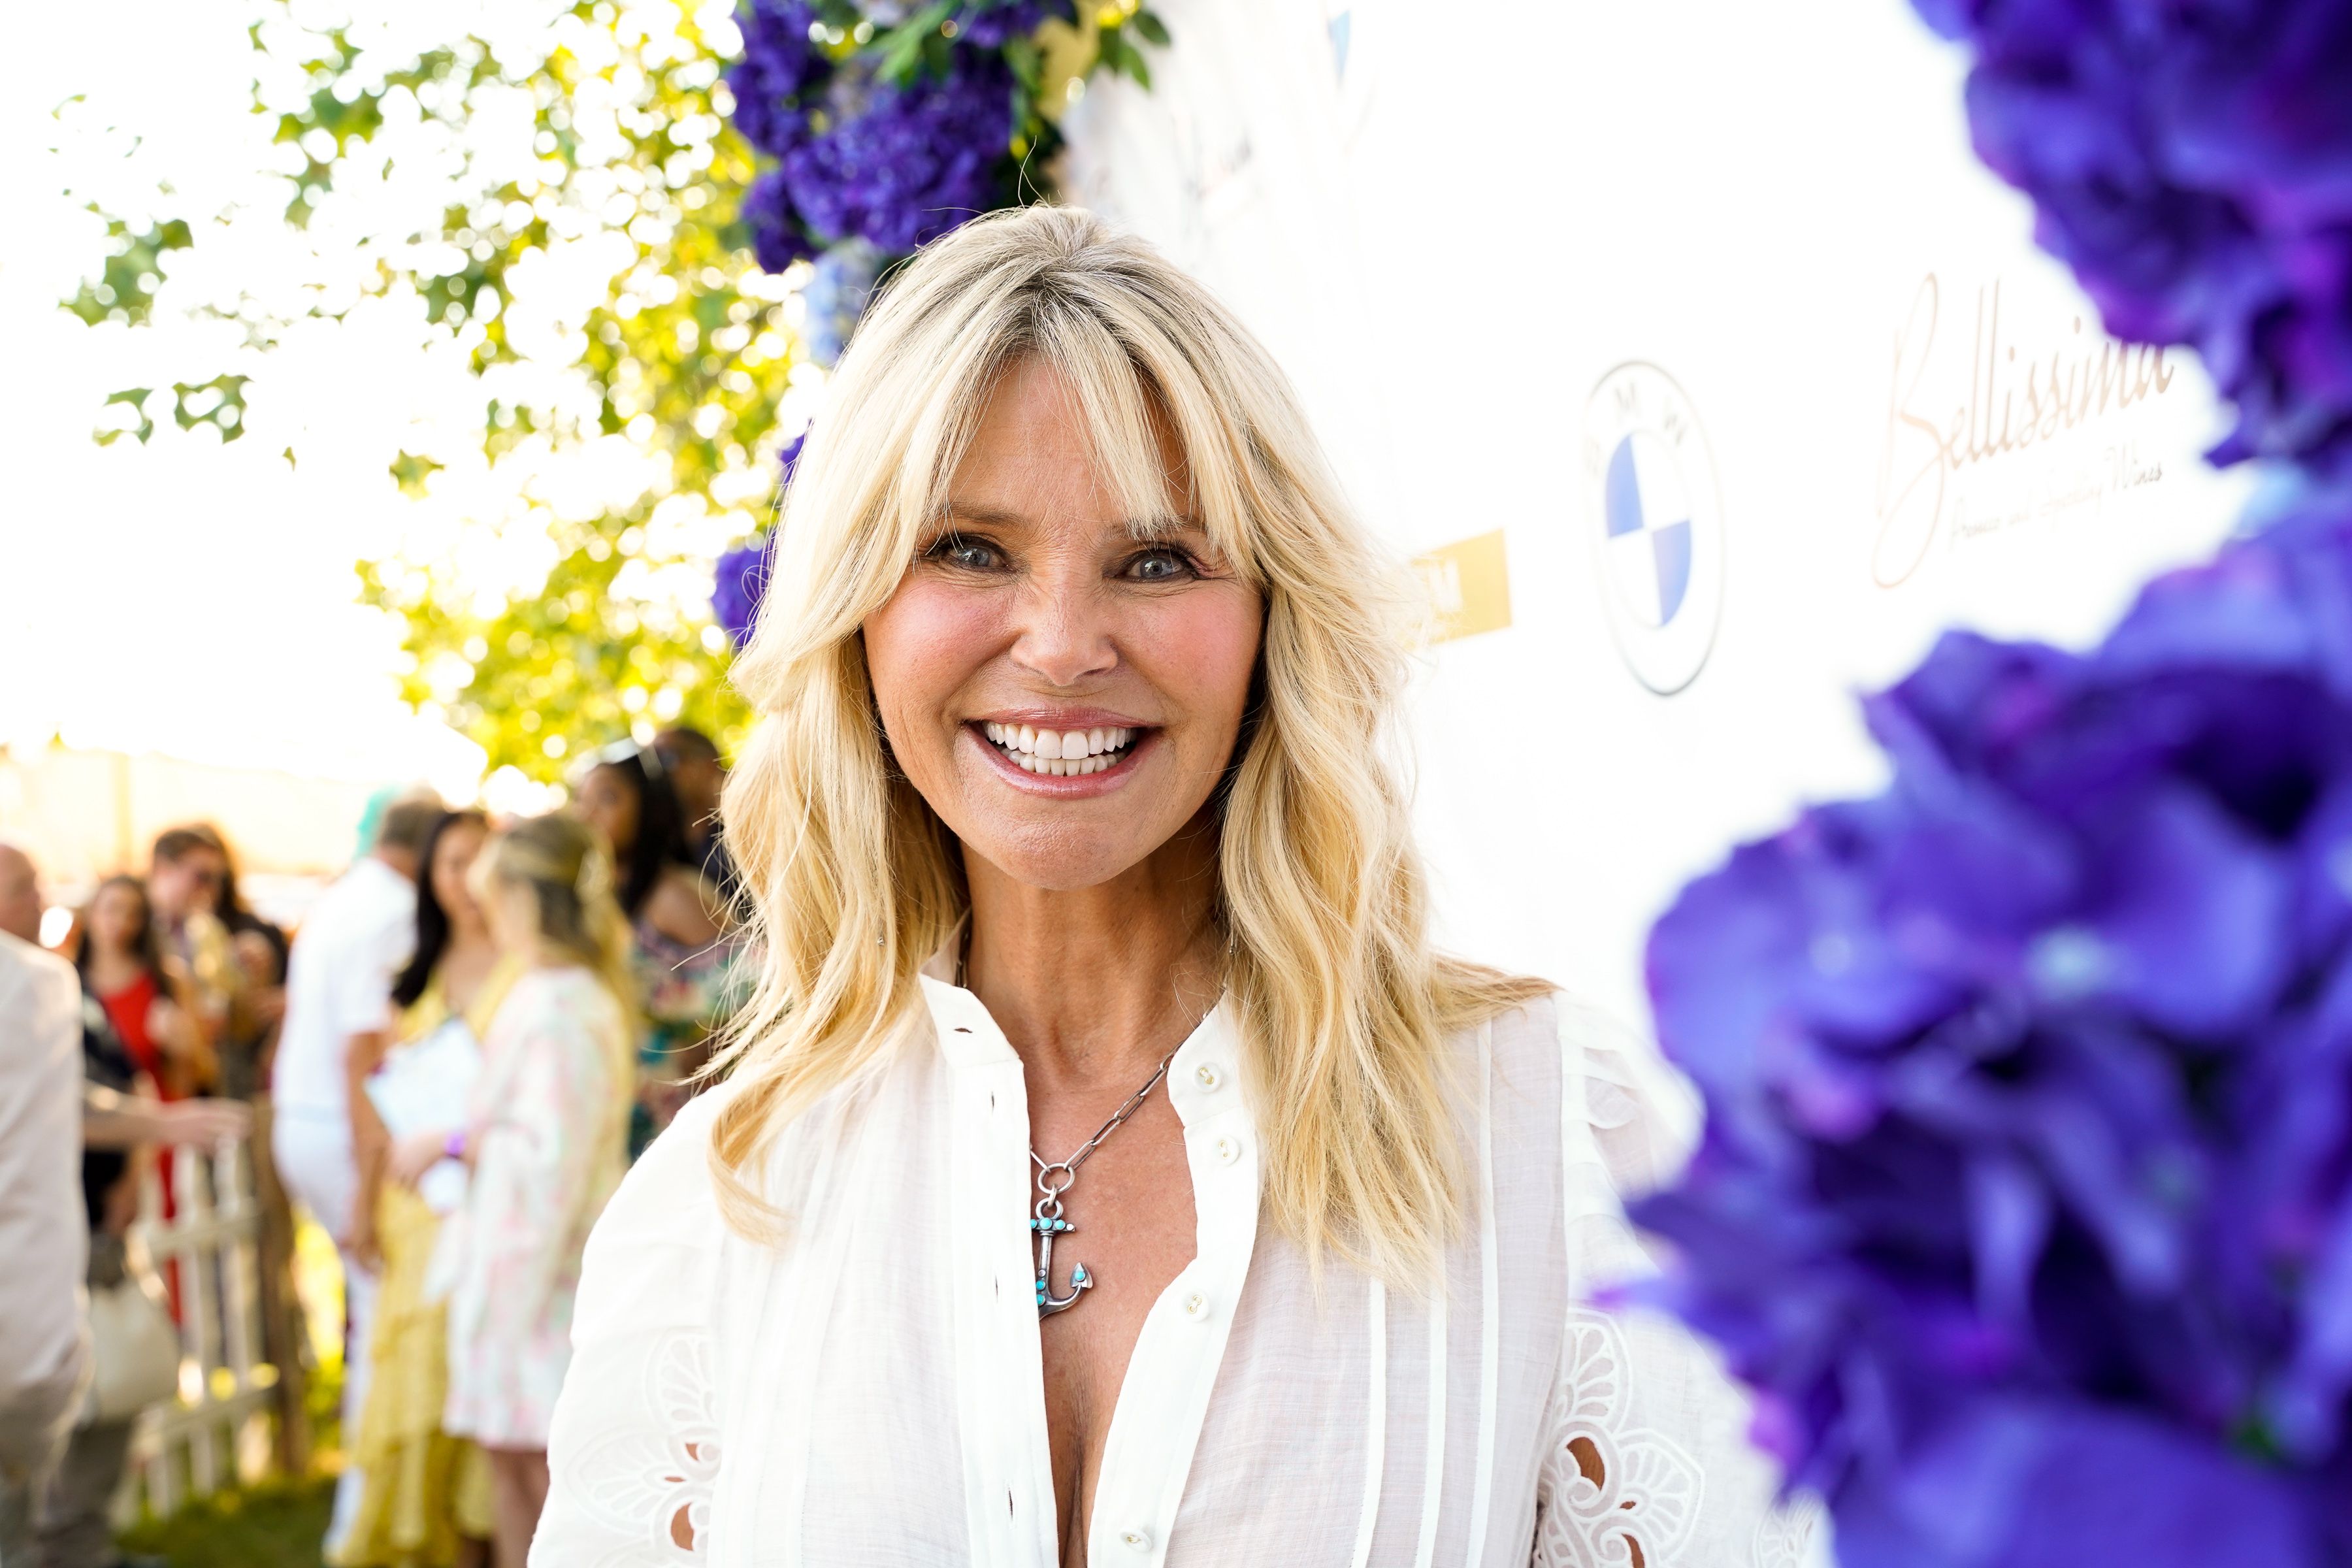 Christie Brinkley 69 Says Aging Is Something To Celebrate “those Days Of Hiding Our Age Are